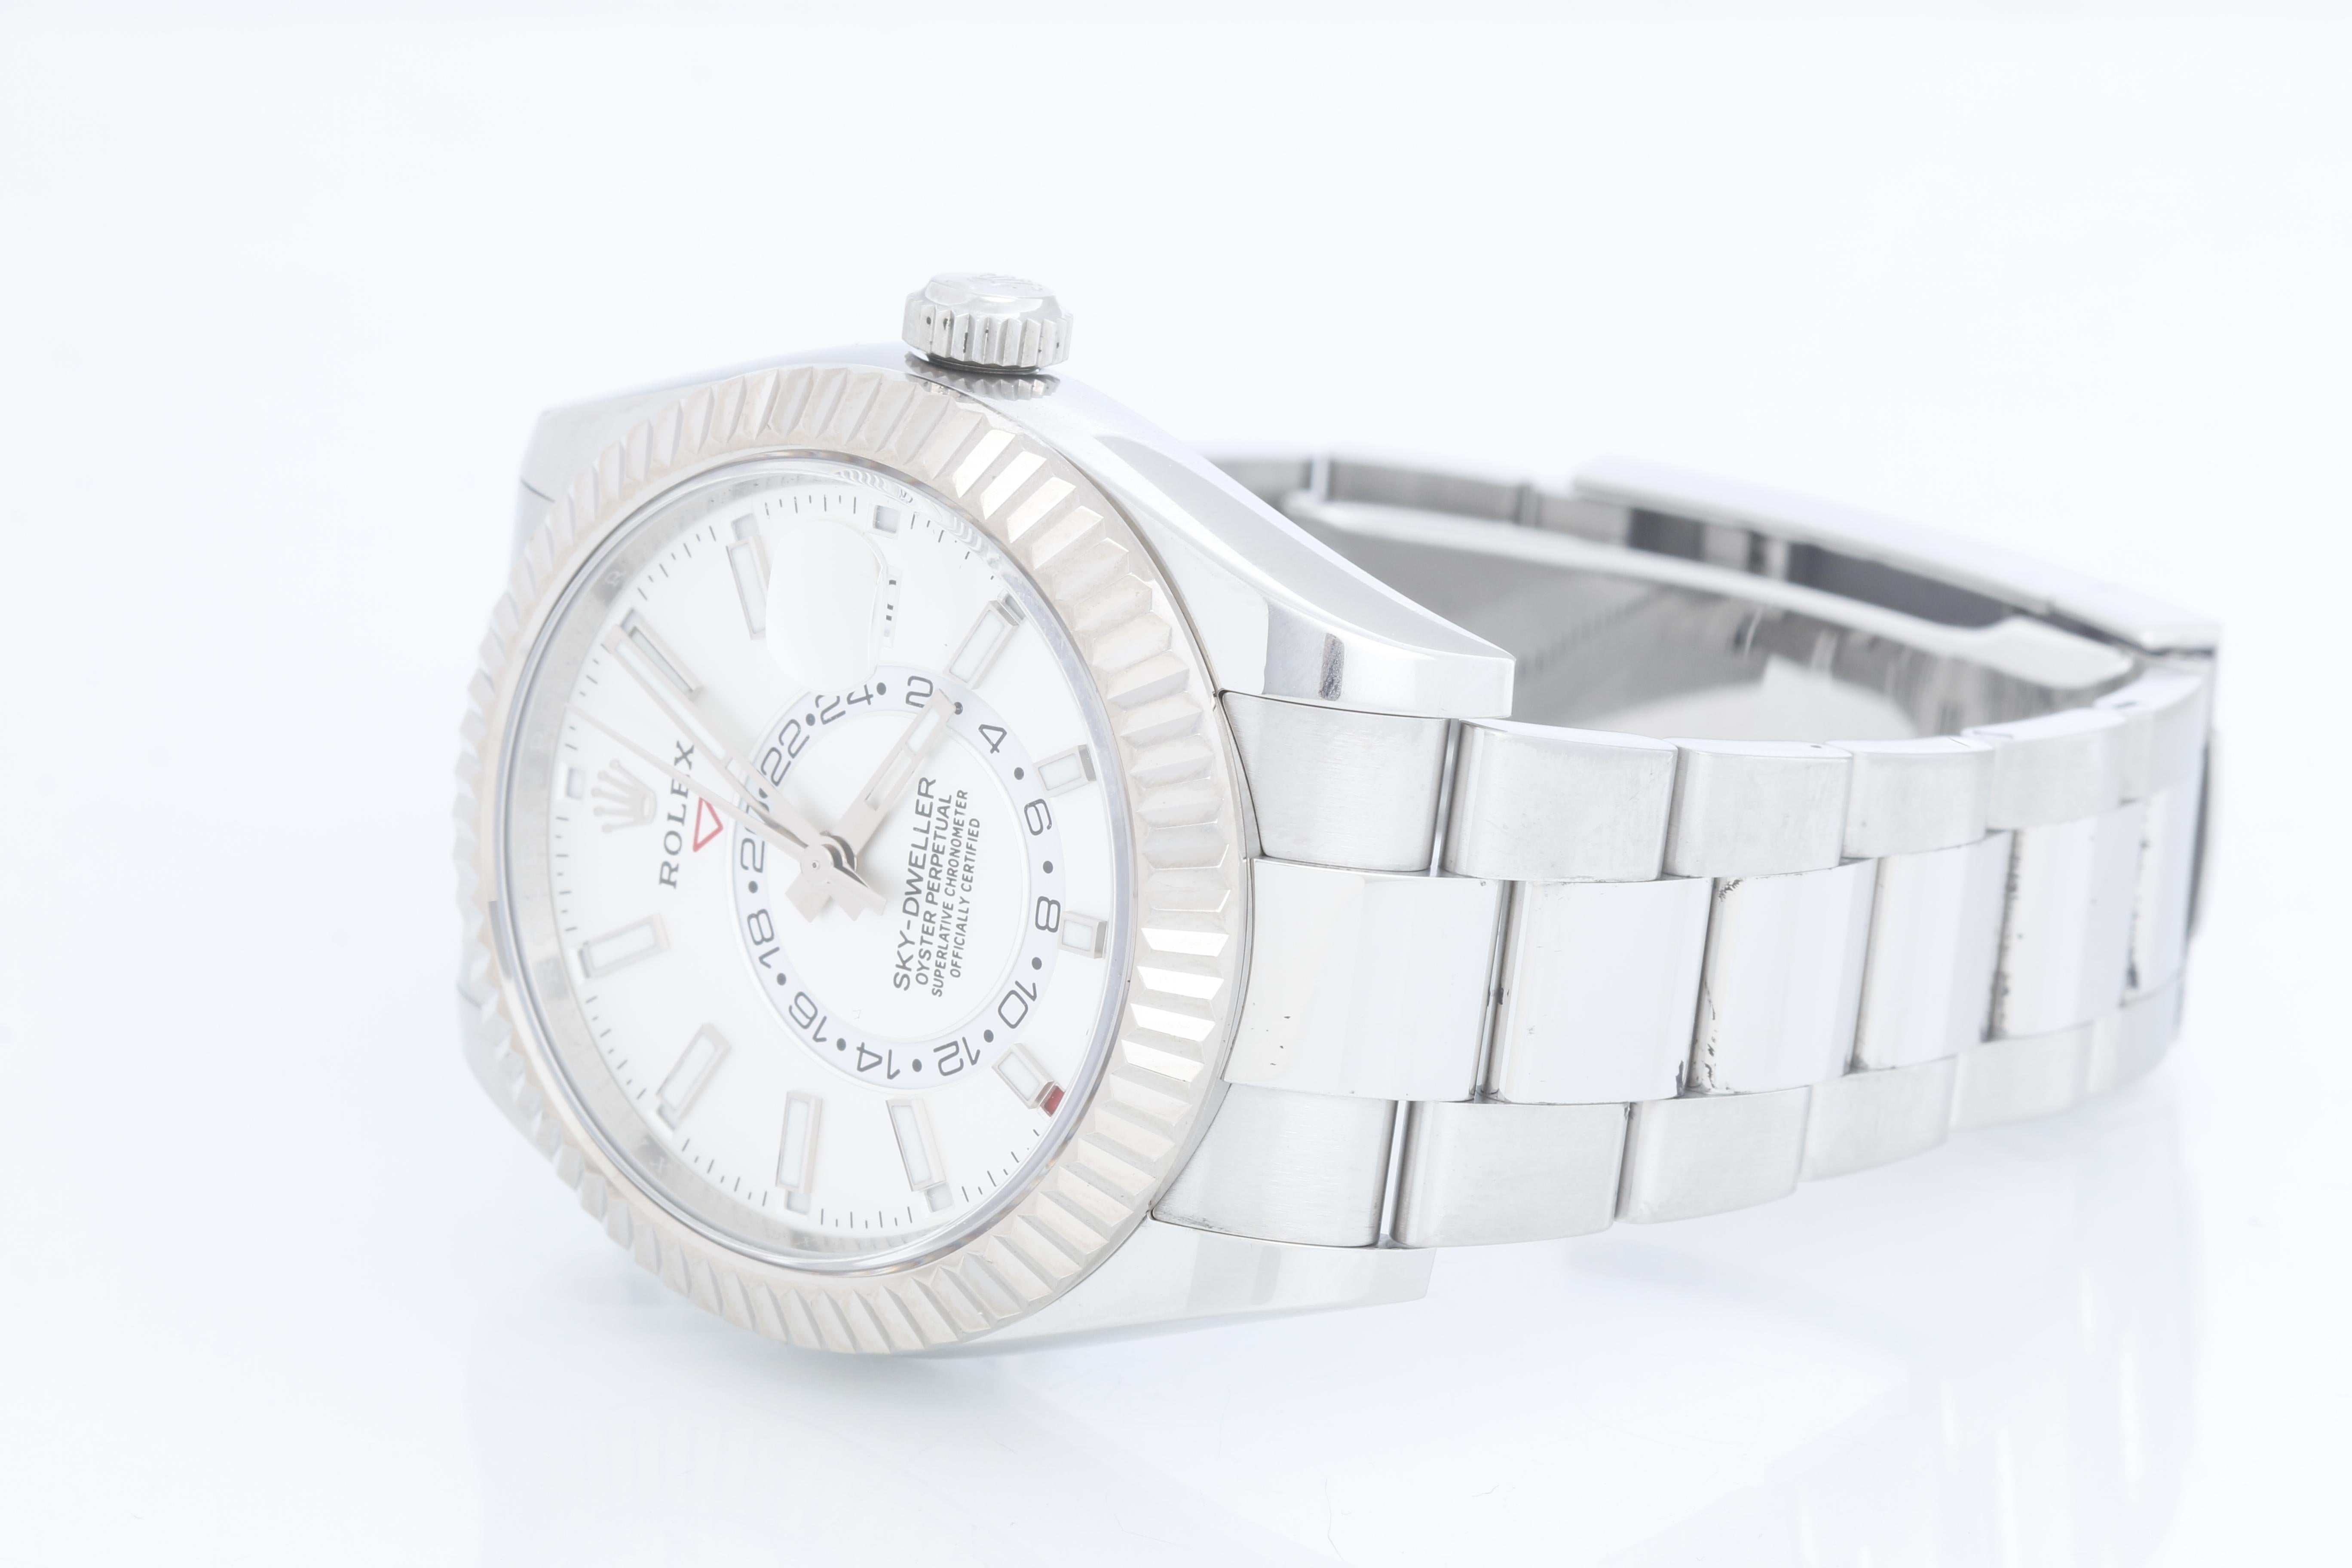 Rolex Sky-Dweller Stainless Steel White Dial 326934 - Automatic, Quickset. Stainless Steel with 18K White gold fluted bezel ( 42 mm ). White dial with index hour markers; date, month, second timezone. Stainless steel with folding clasp. Pre-owned